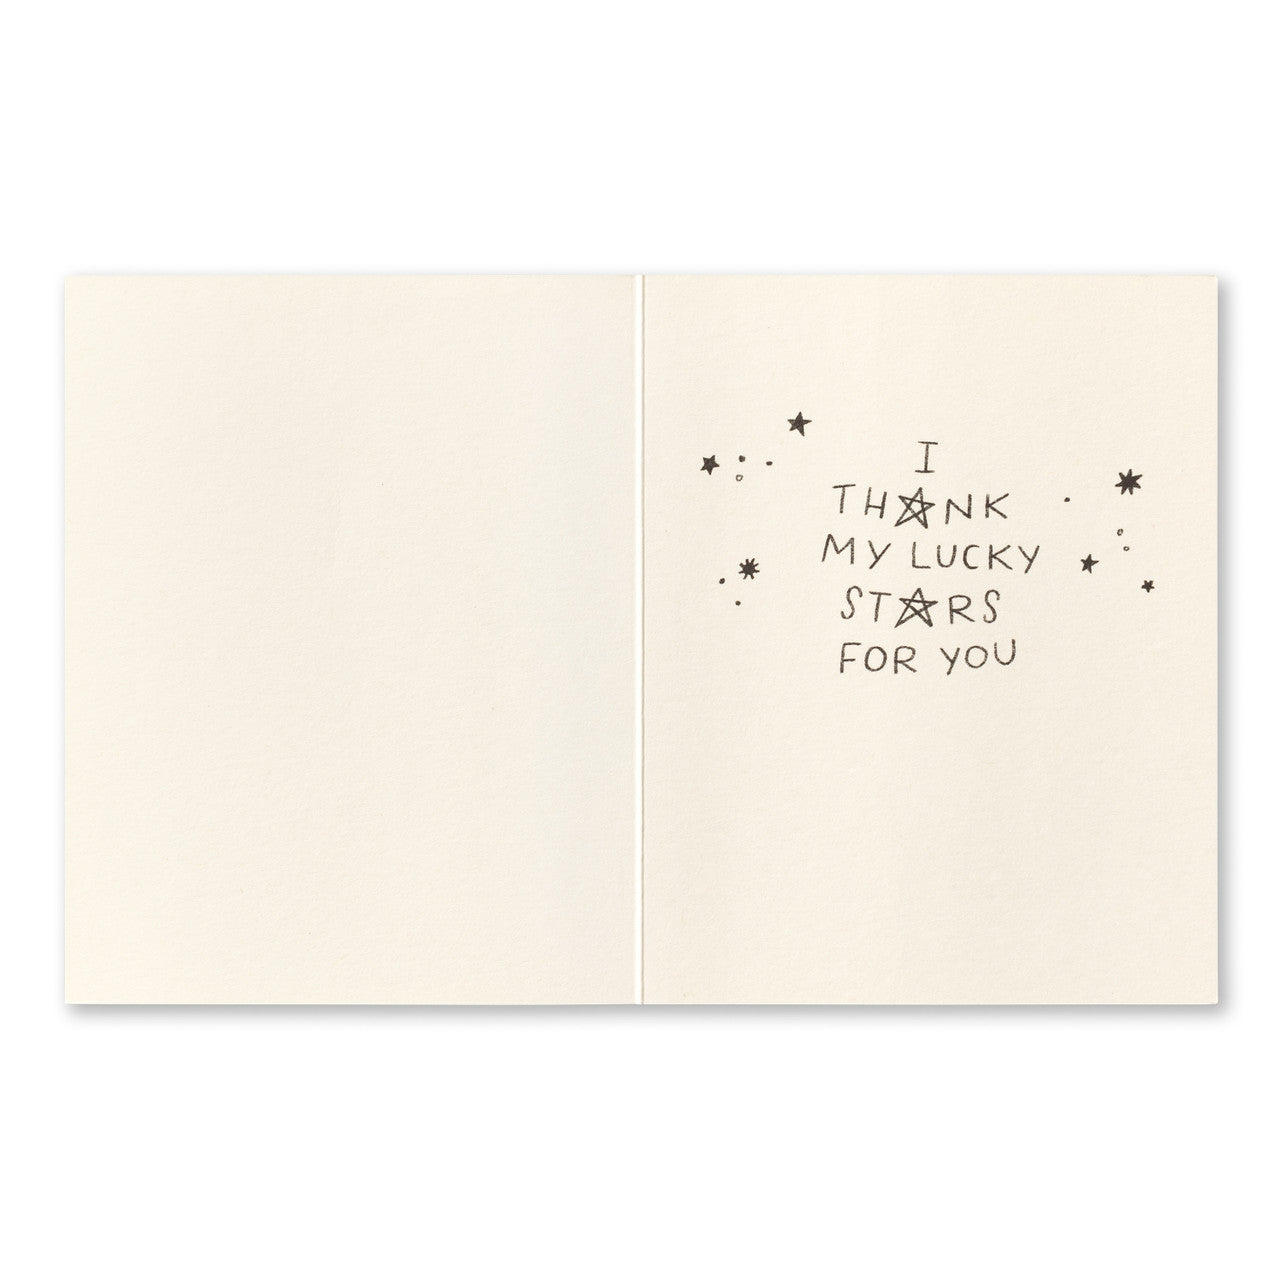 Love Muchly Greeting Card - Thank You - I thank my lucky stars for you. - Mellow Monkey